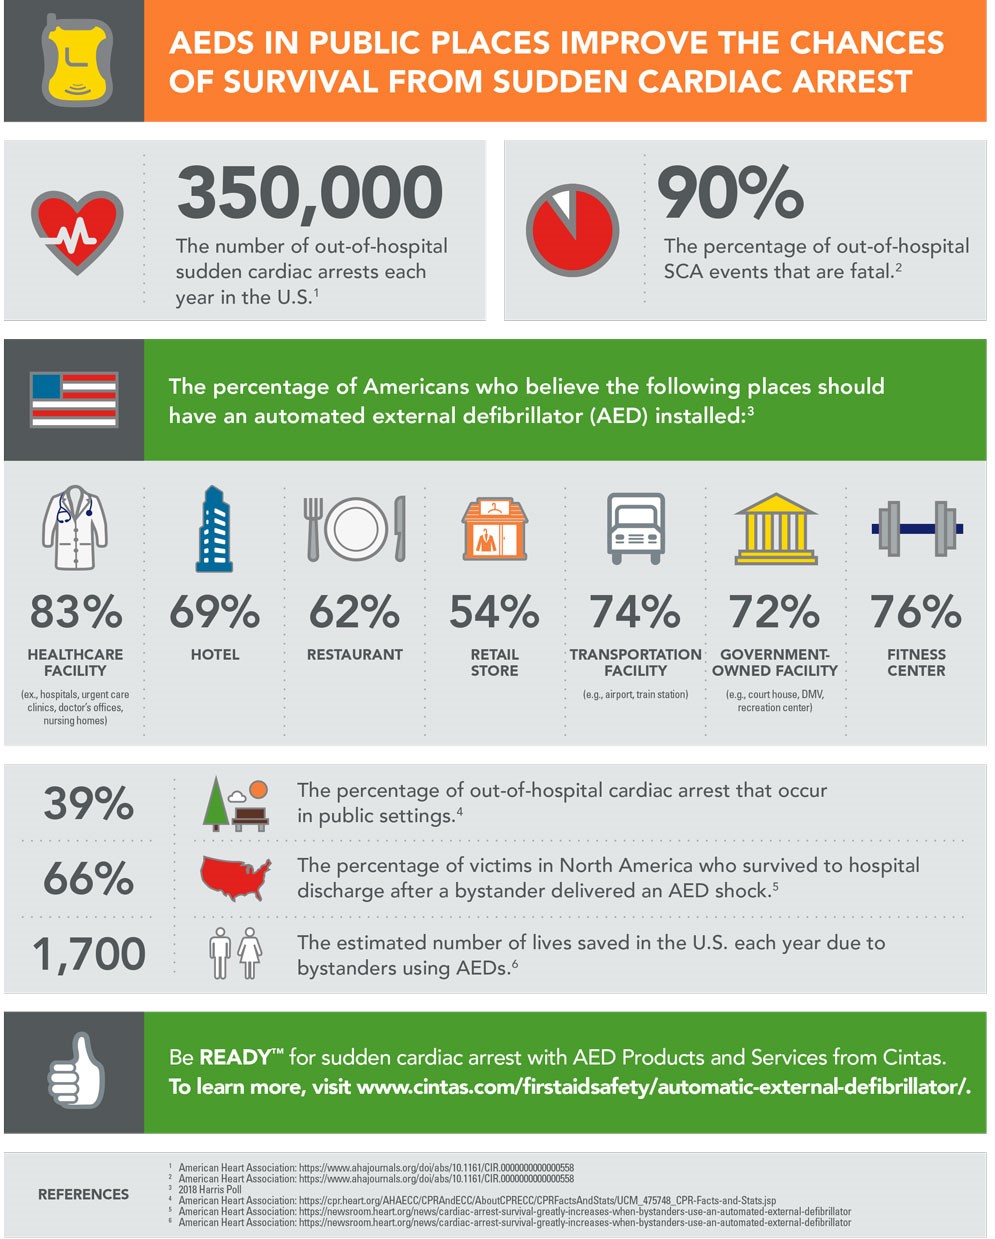 Infographic about AED usage and availability in public places